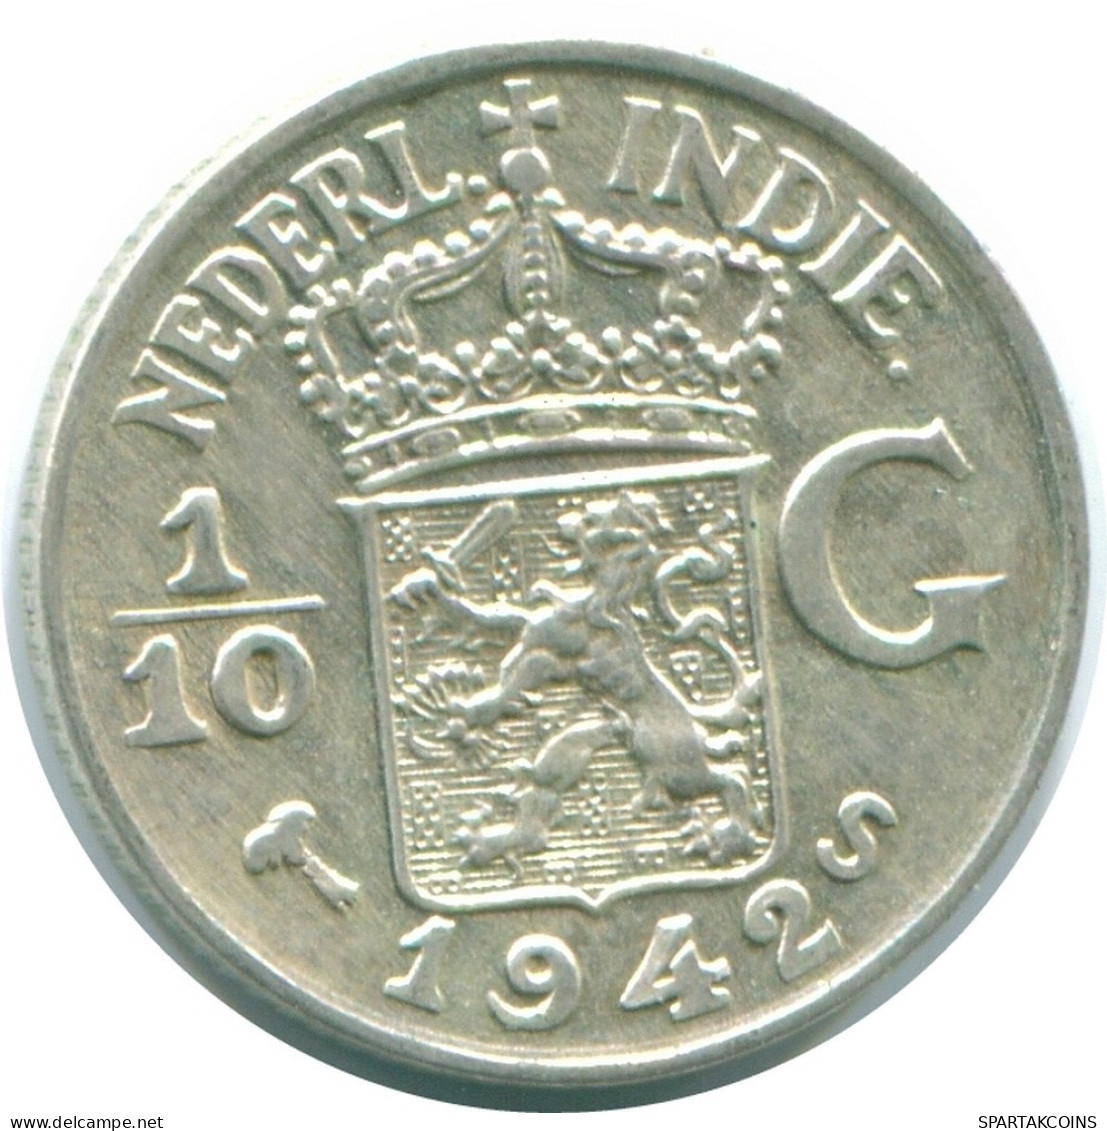 1/10 GULDEN 1942 NETHERLANDS EAST INDIES SILVER Colonial Coin #NL13891.3.U.A - Indie Olandesi